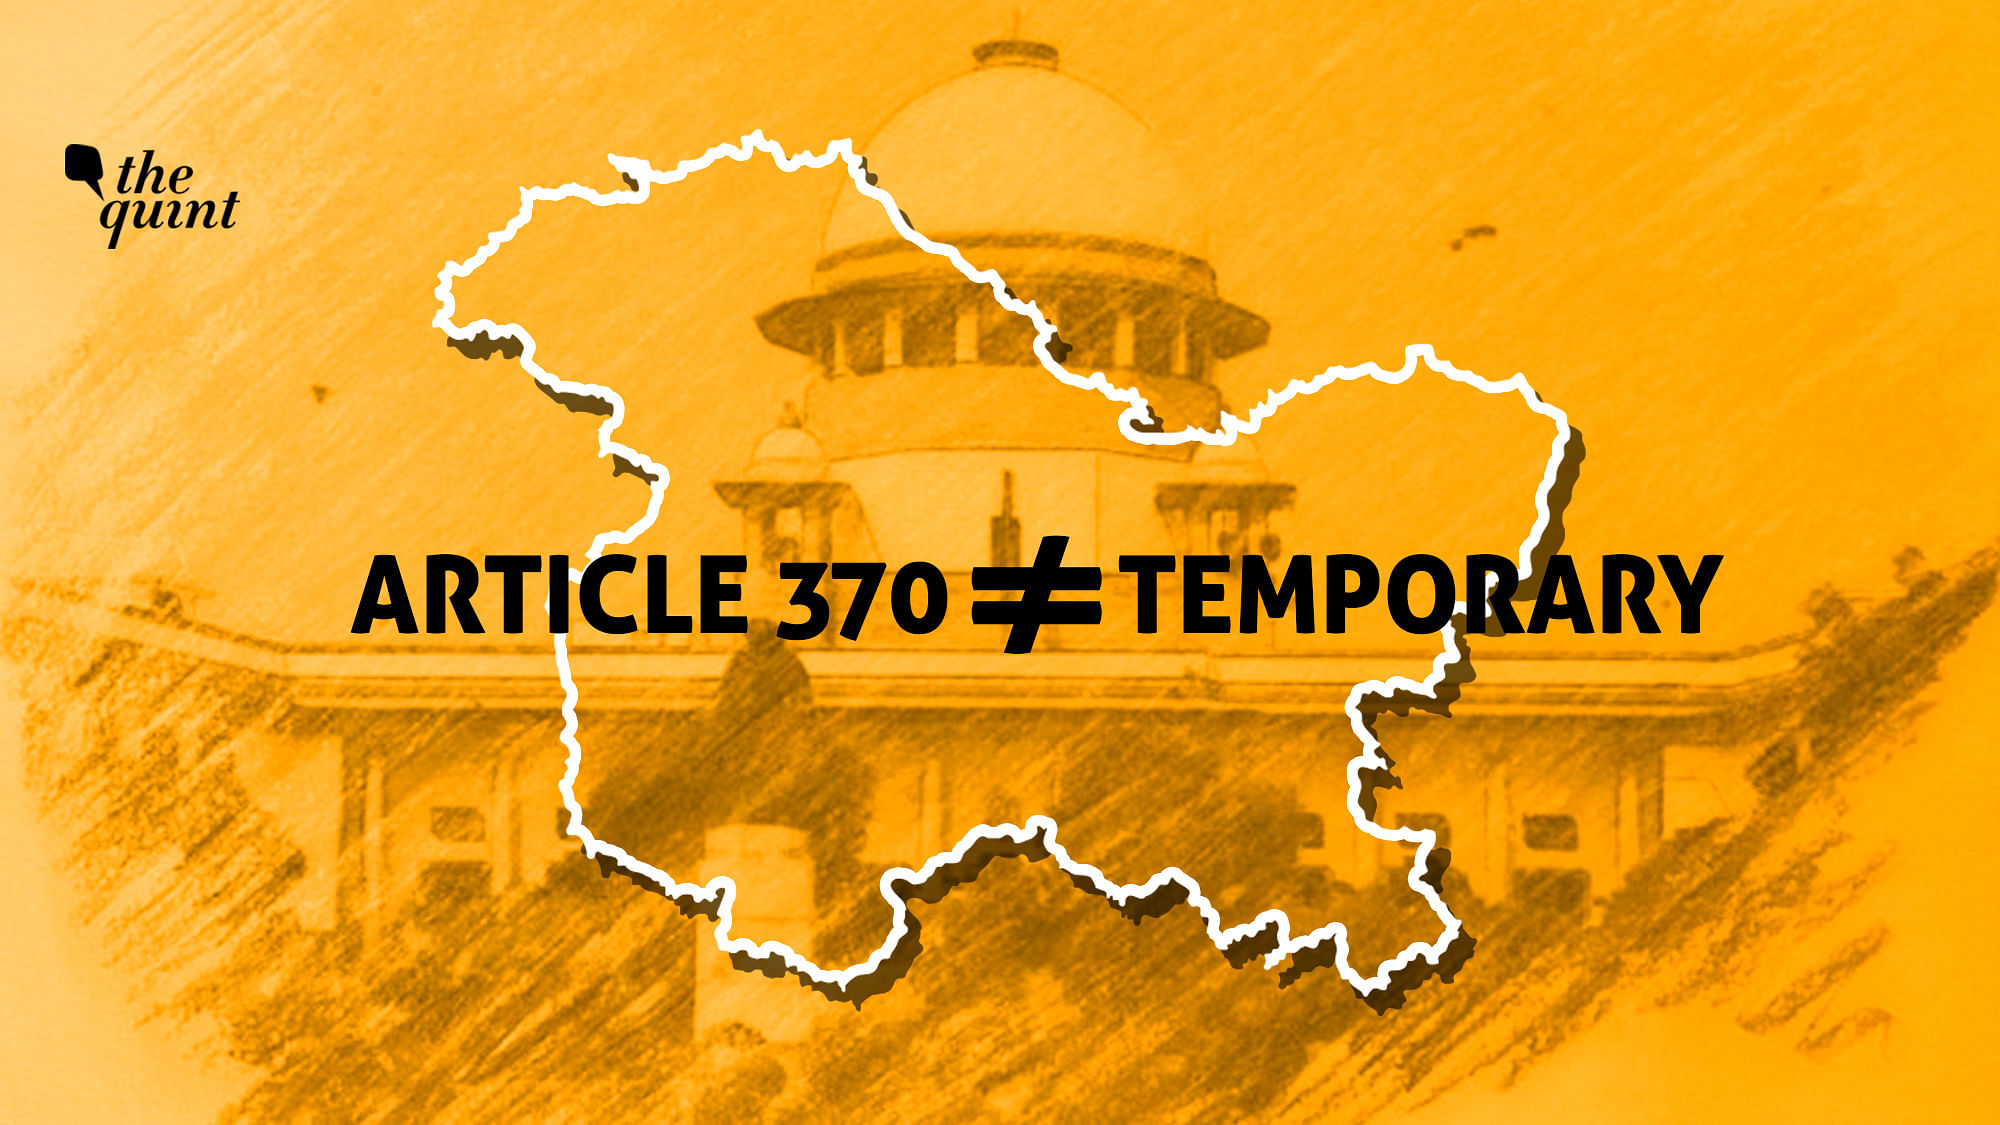 The Supreme Court has, at least twice before, held that Article 370 was not temporary